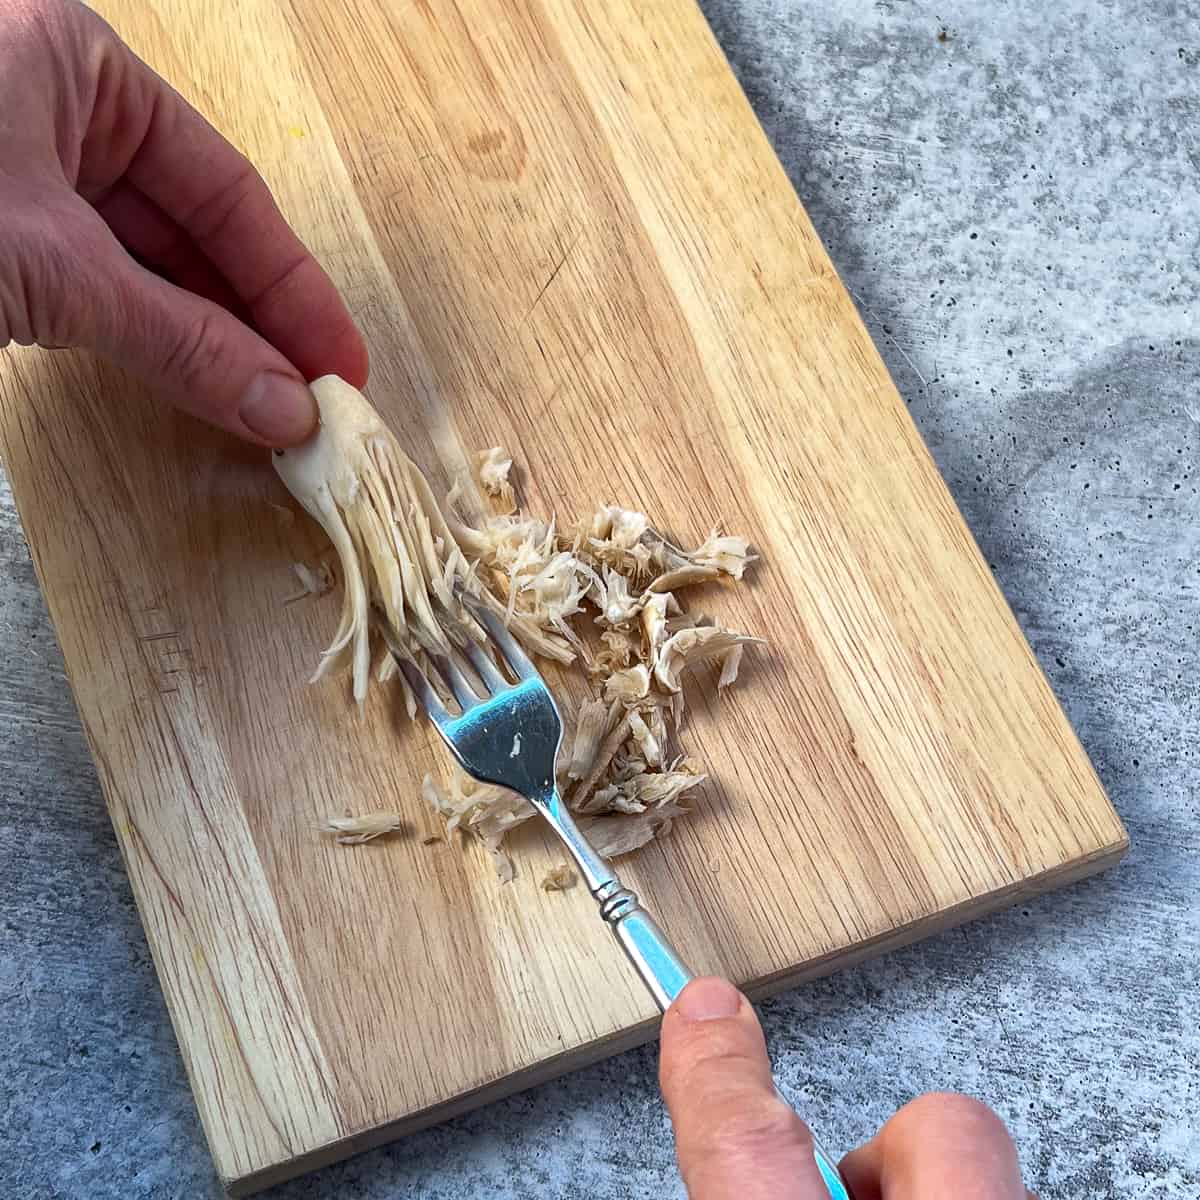 A woman's hands using a fork to shred the oyster mushrooms on a cutting board.